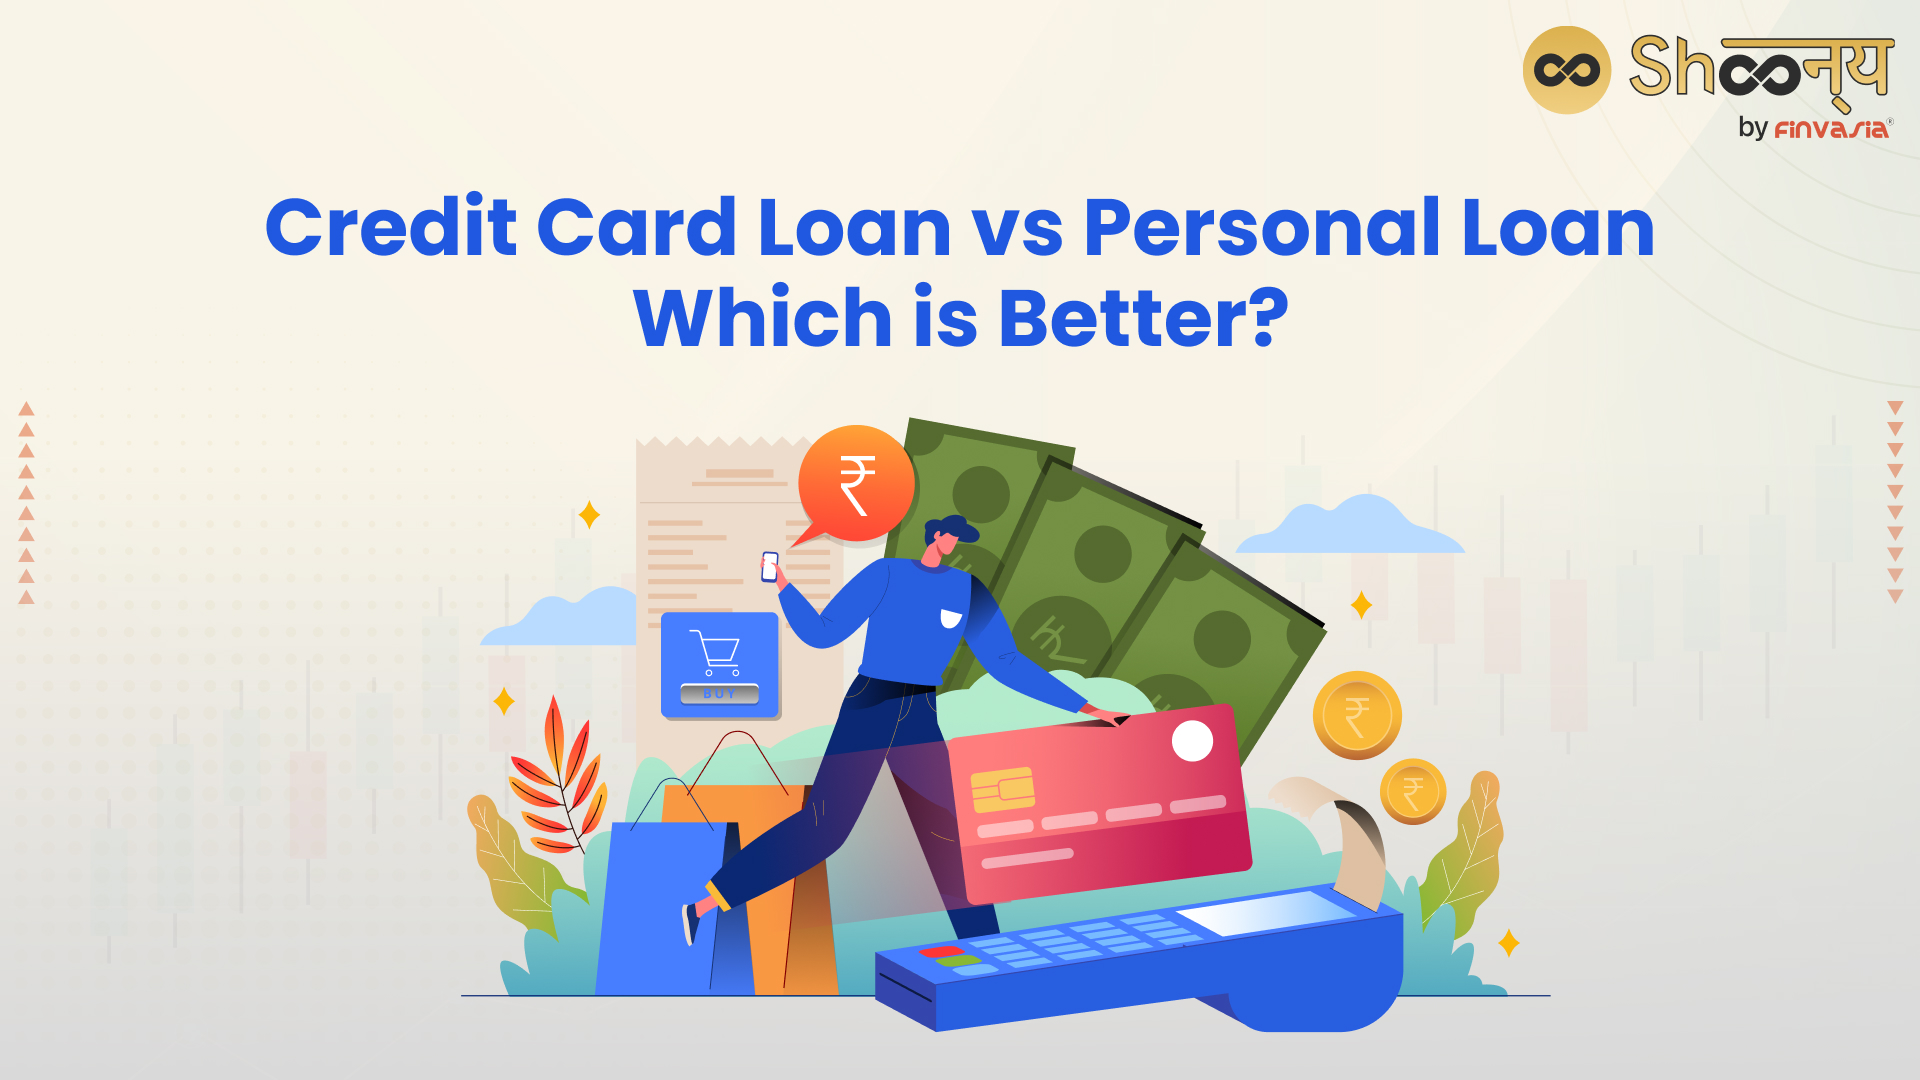 Credit Card Loan vs Personal Loan: Which is Better?